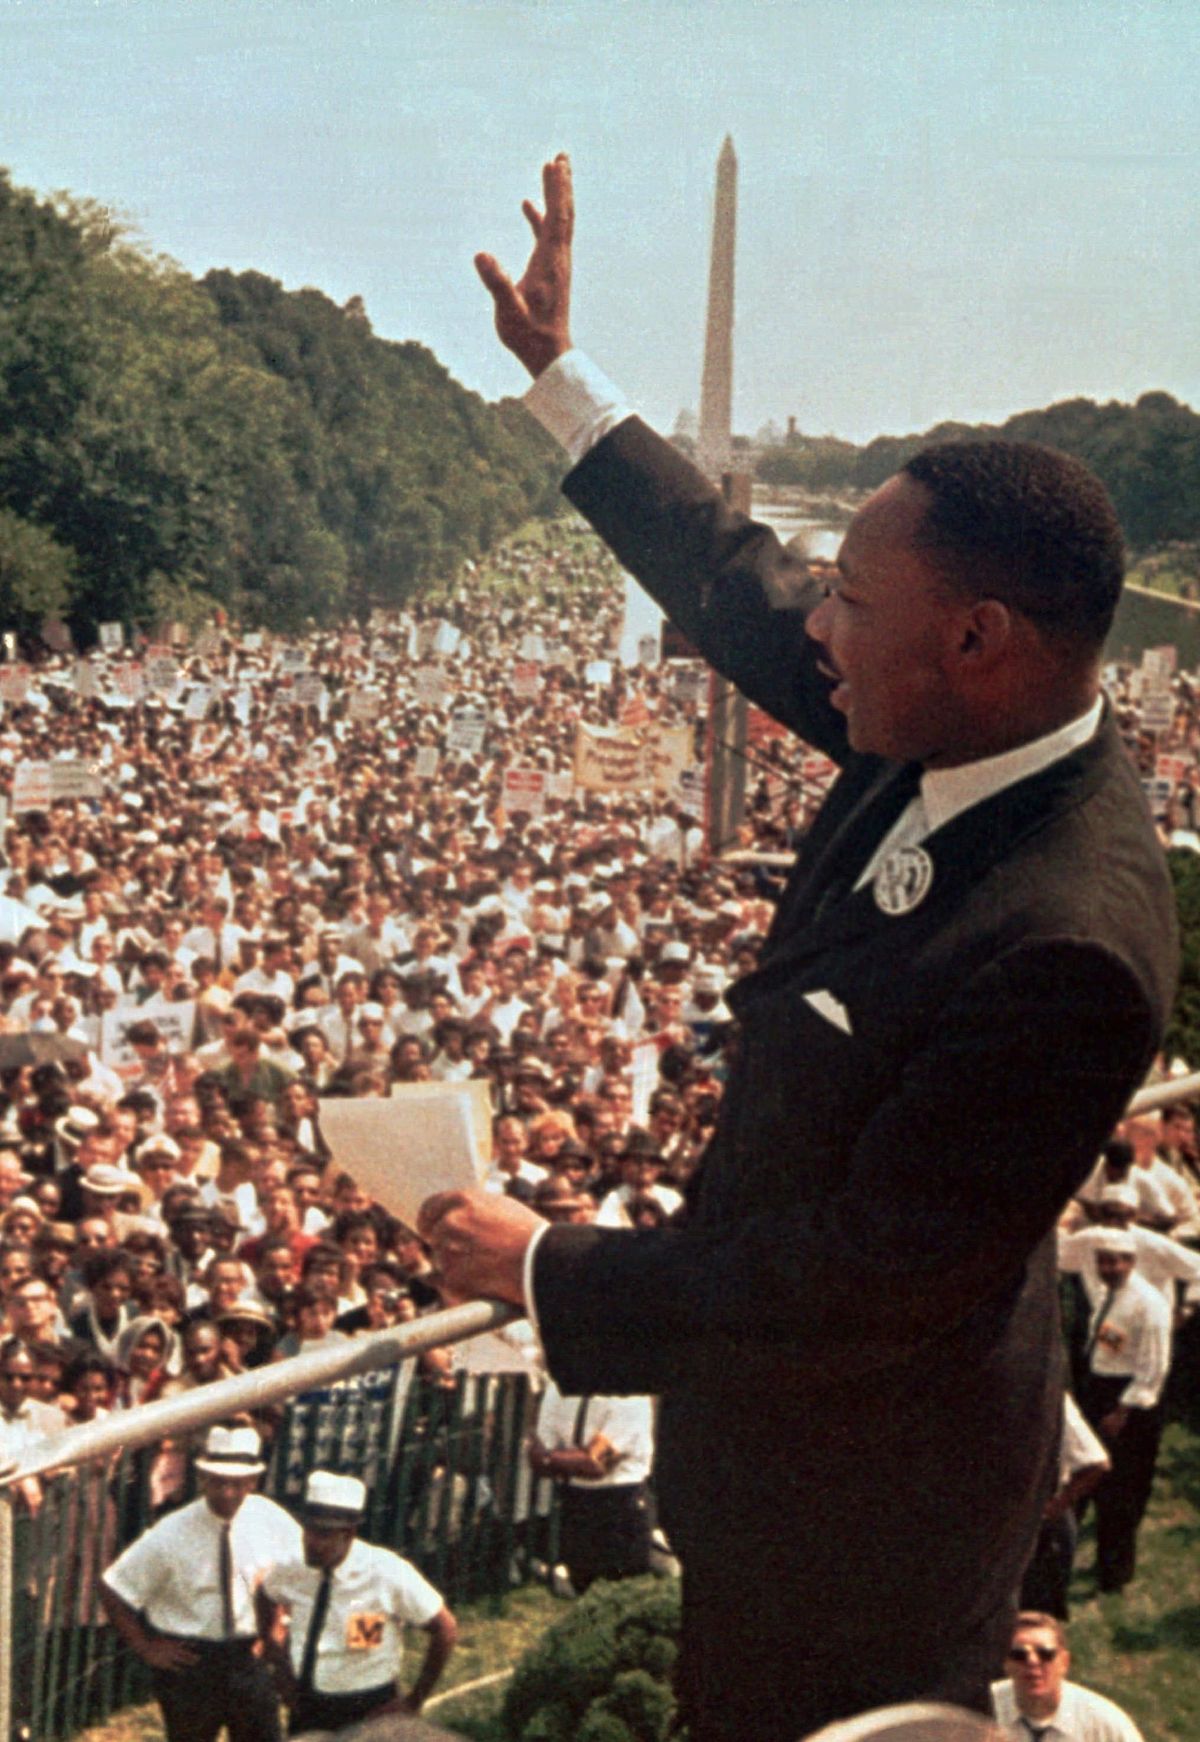 The Rev. Martin Luther King Jr. acknowledges the crowd at the Lincoln Memorial for his “I Have a Dream” speech during the March on Washington, D.C., oin this Aug. 28, 1963, file photo. The march was organized to support proposed civil rights legislation and end segregation. King founded the Southern Christian Leadership Conference in 1957, advocating nonviolent action against America’s racial inequality. He was awarded the Nobel Peace Prize in 1964, and was assassinated in Memphis, Tenn., in April 1968. (Associated Press)